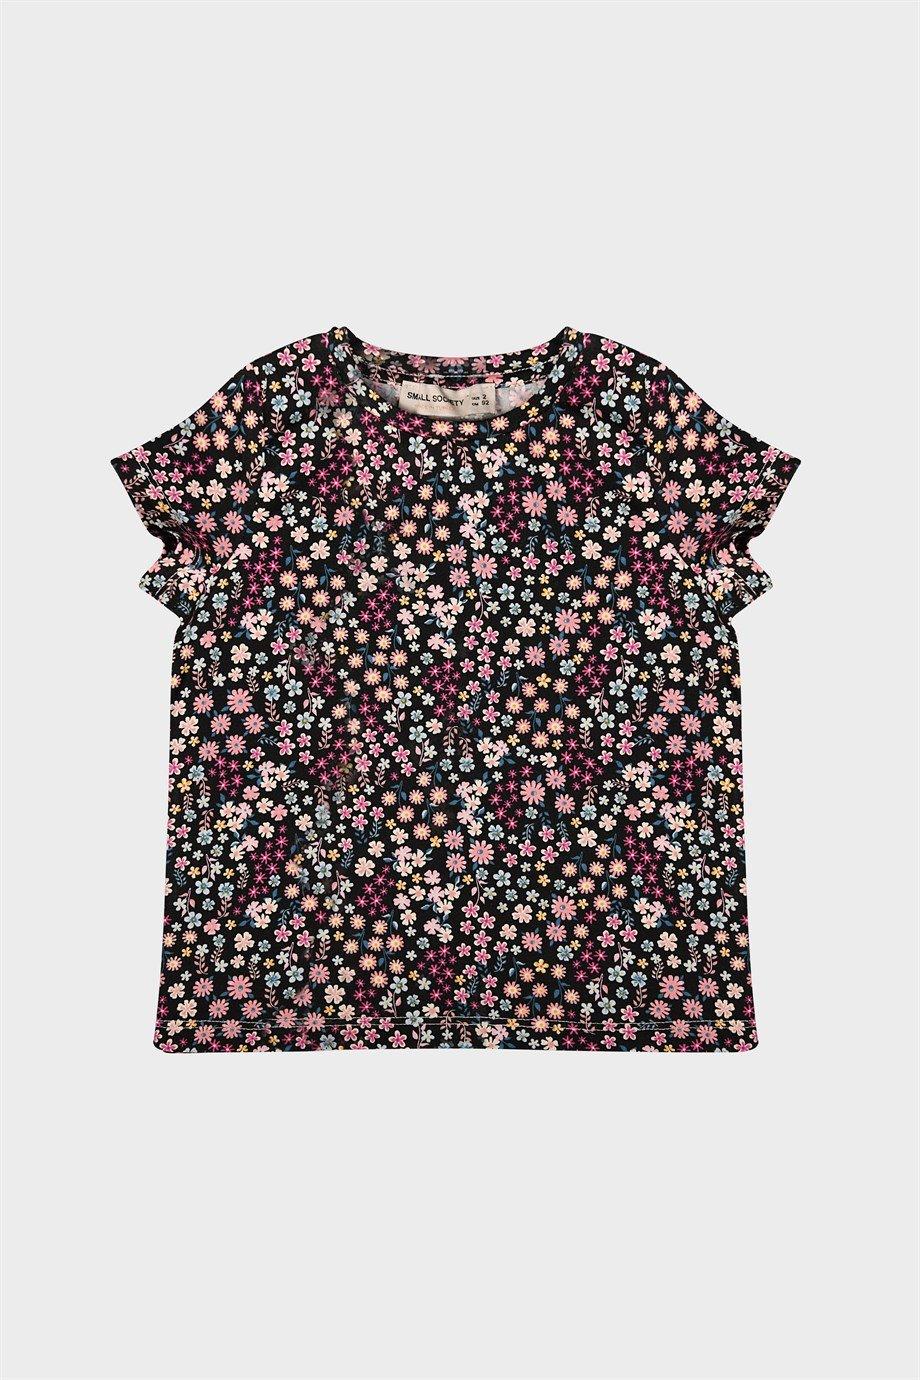 Small Society Flower Printed T-Shirt for Girl